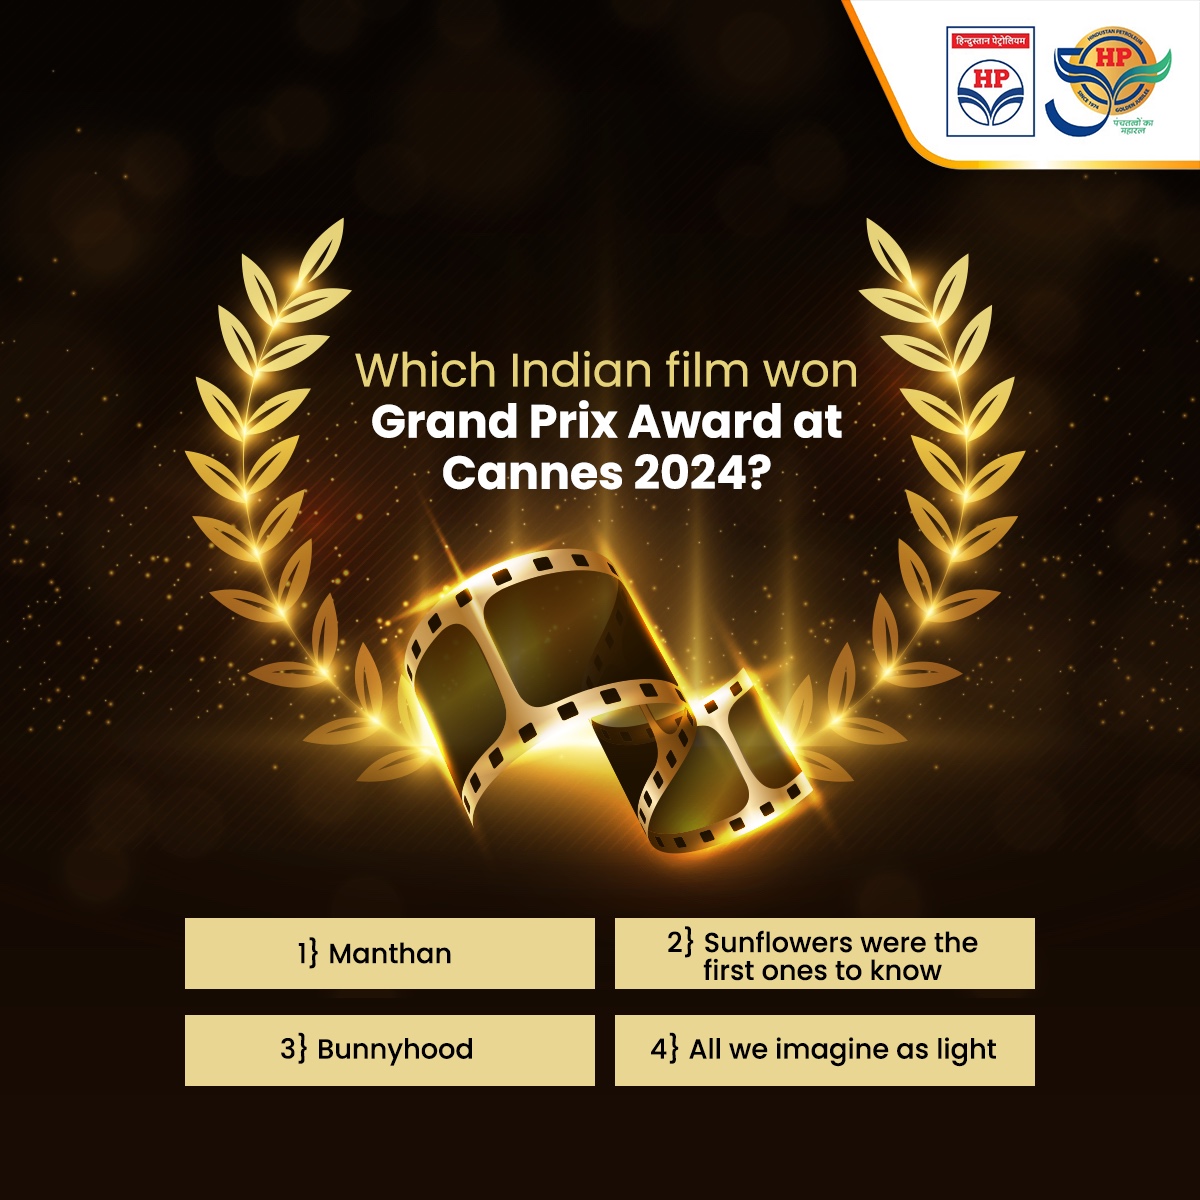 An Indian film has recently won an important award at the Cannes Film Festival. Name it without checking the internet and do challenge your friends to do the same. #InterestingQuiz #HPTowardsGoldenHorizon #HPCL #DeliveringHappiness